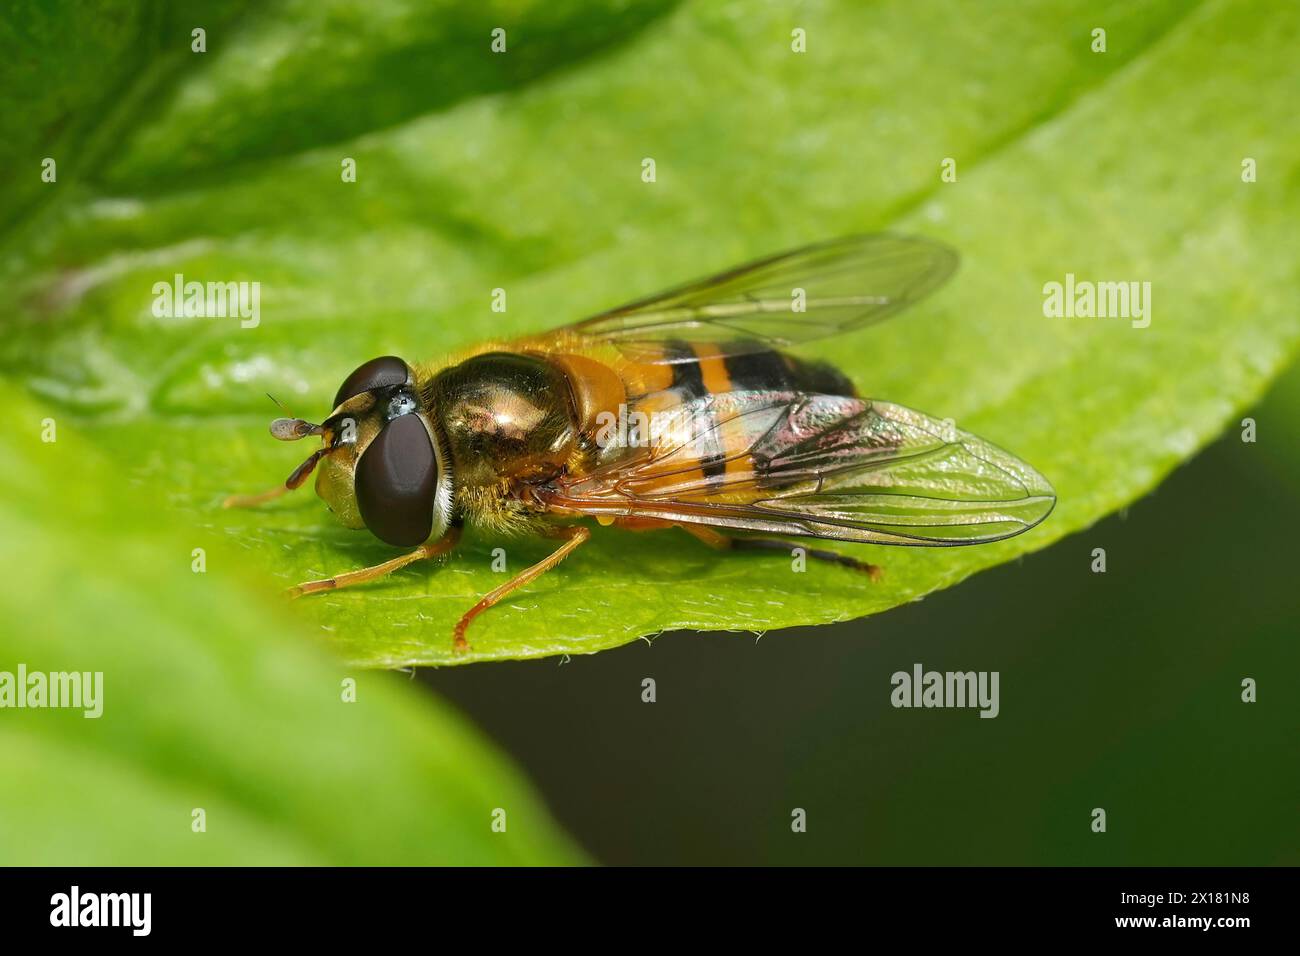 Detailed closeup on the European spring epistrophe hoverfly, Epistrophe eligans sitting on a green leaf Stock Photo